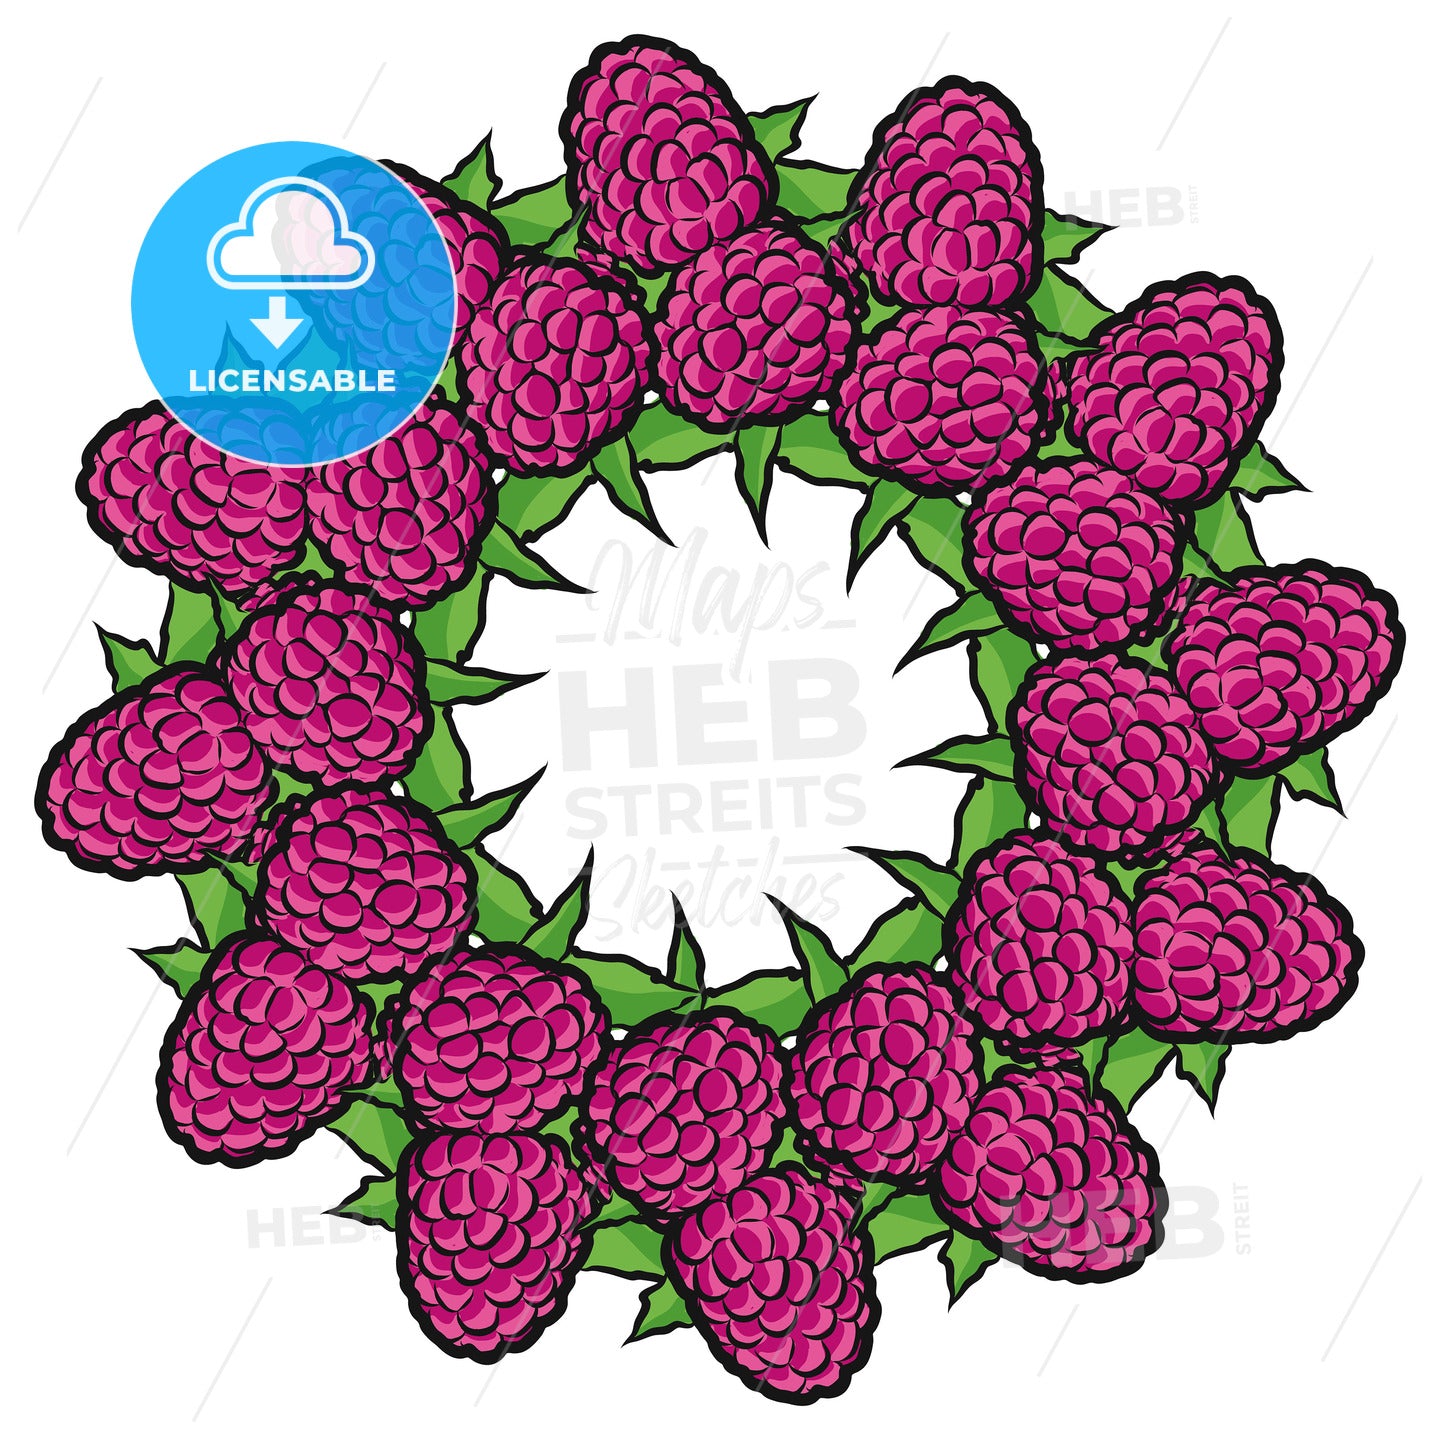 Many raspberries arranged in a circle on white – instant download